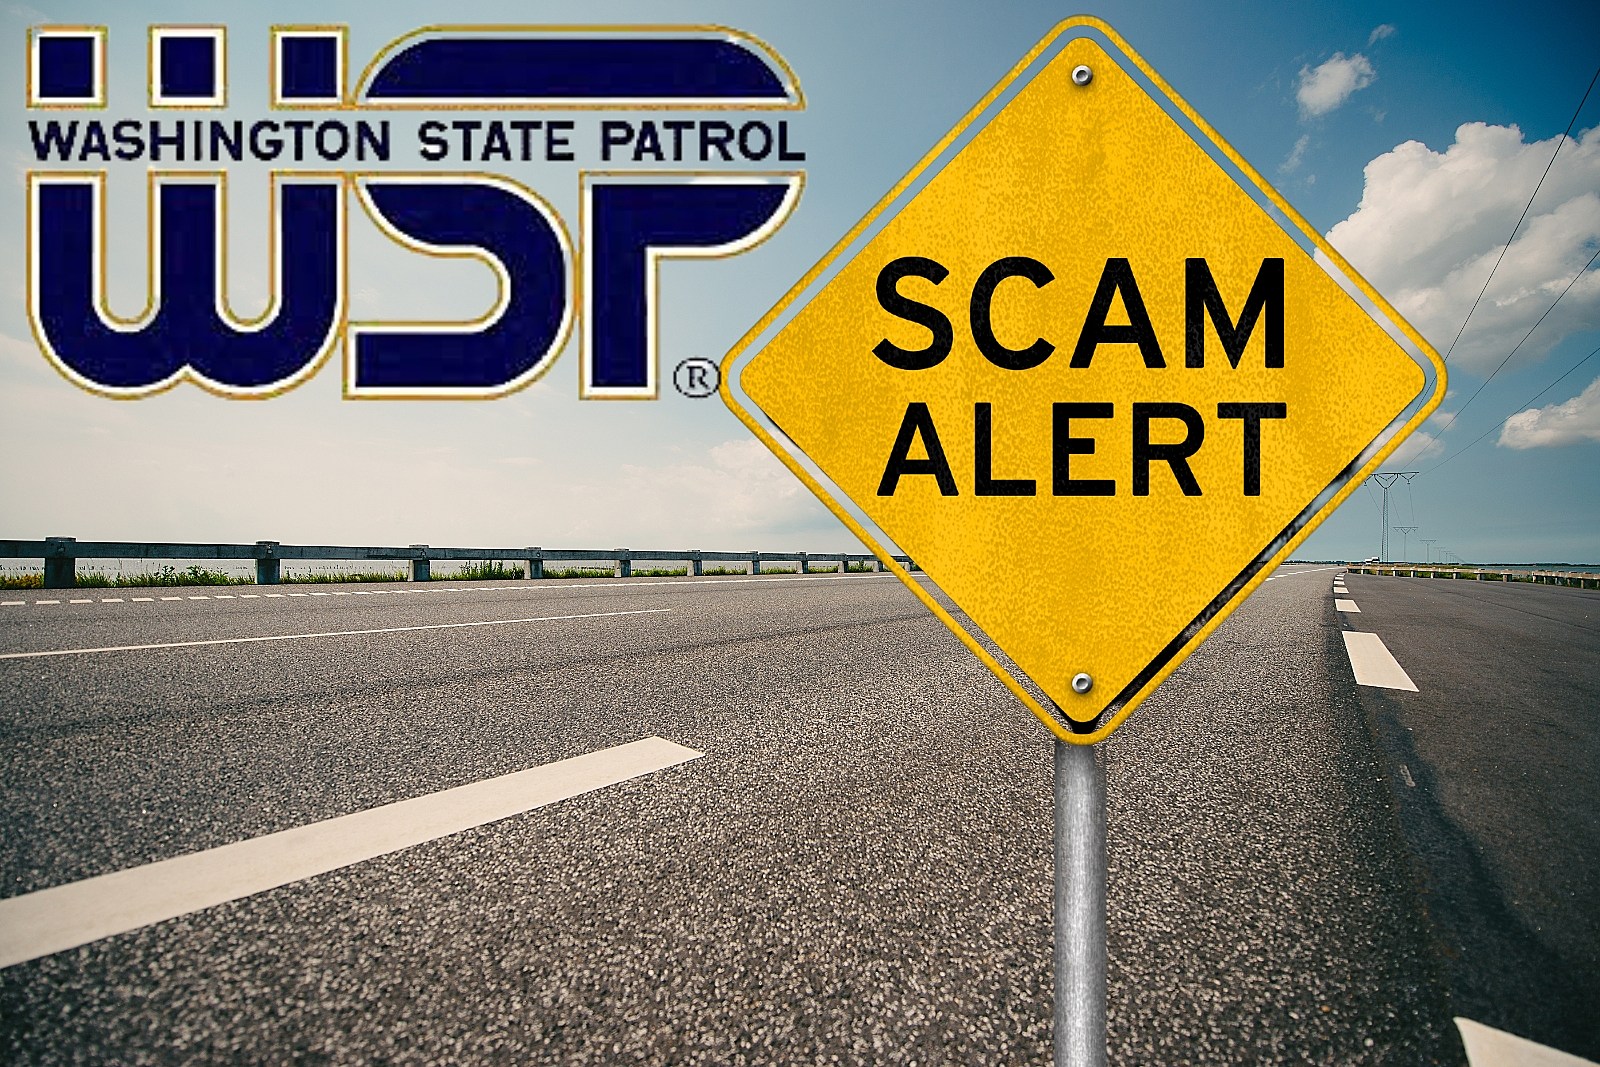 CHP Warns People About Fake Jewelry Scam